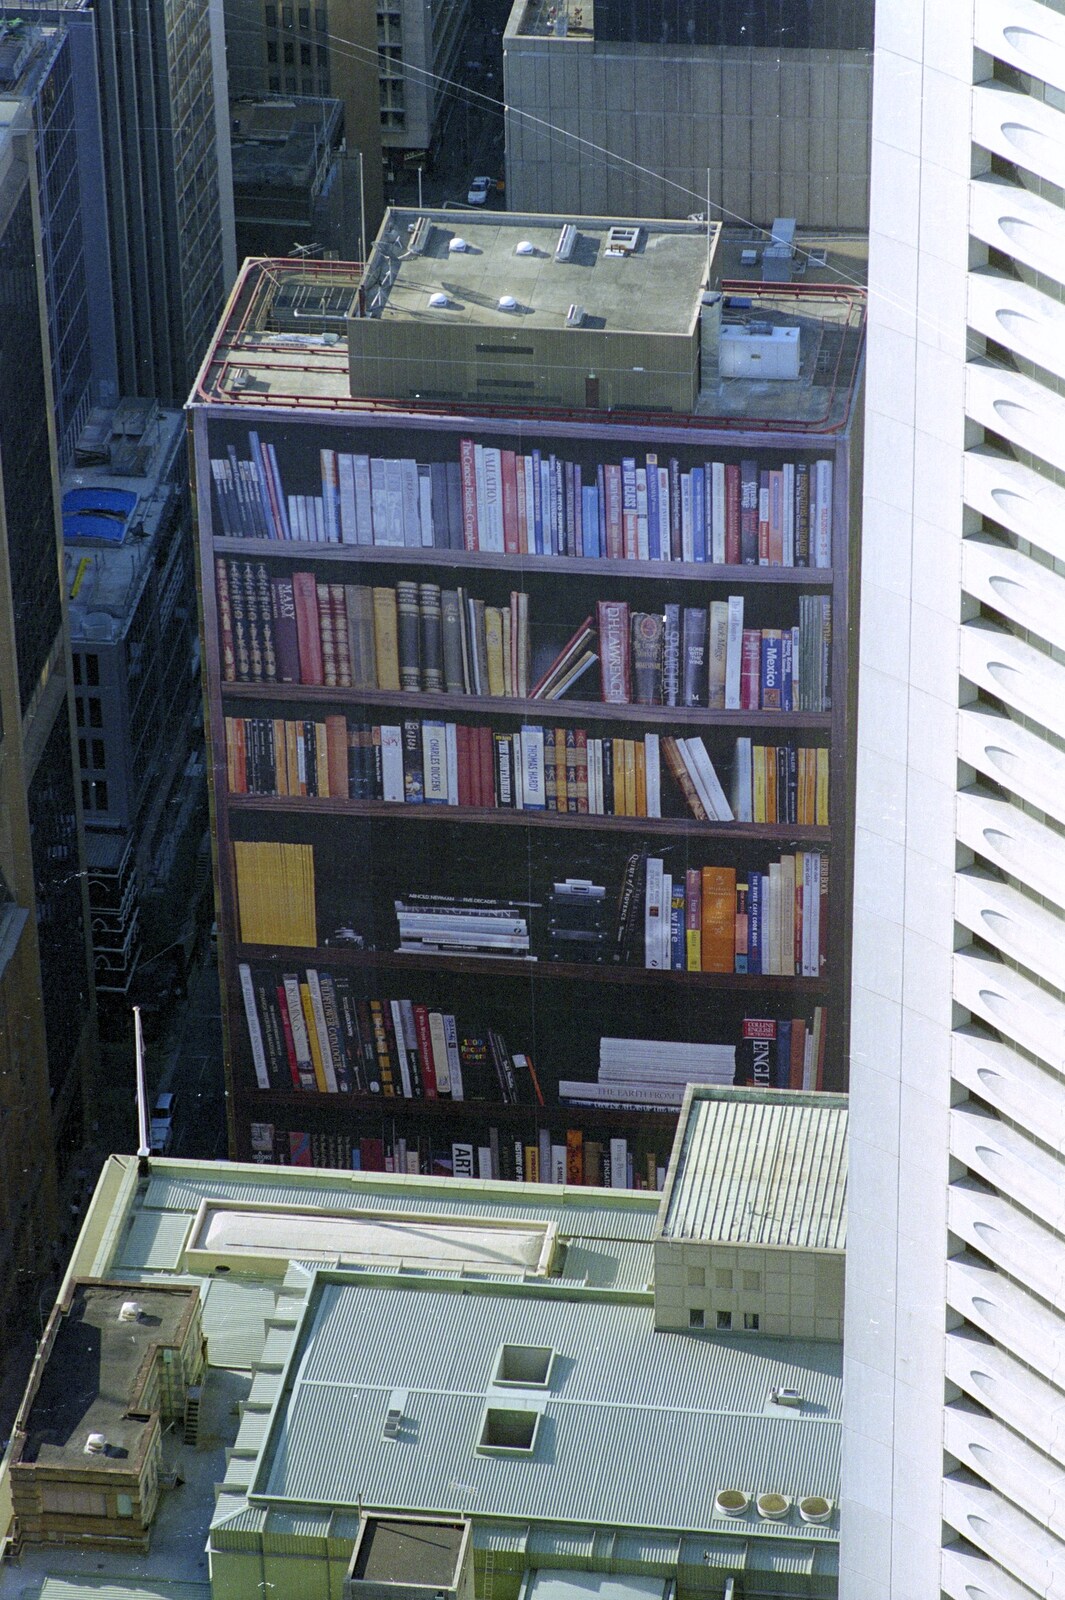 A view of a bookcase from the Sydney Tower from Sydney Triathlon, Sydney, Australia - 16th April 2000